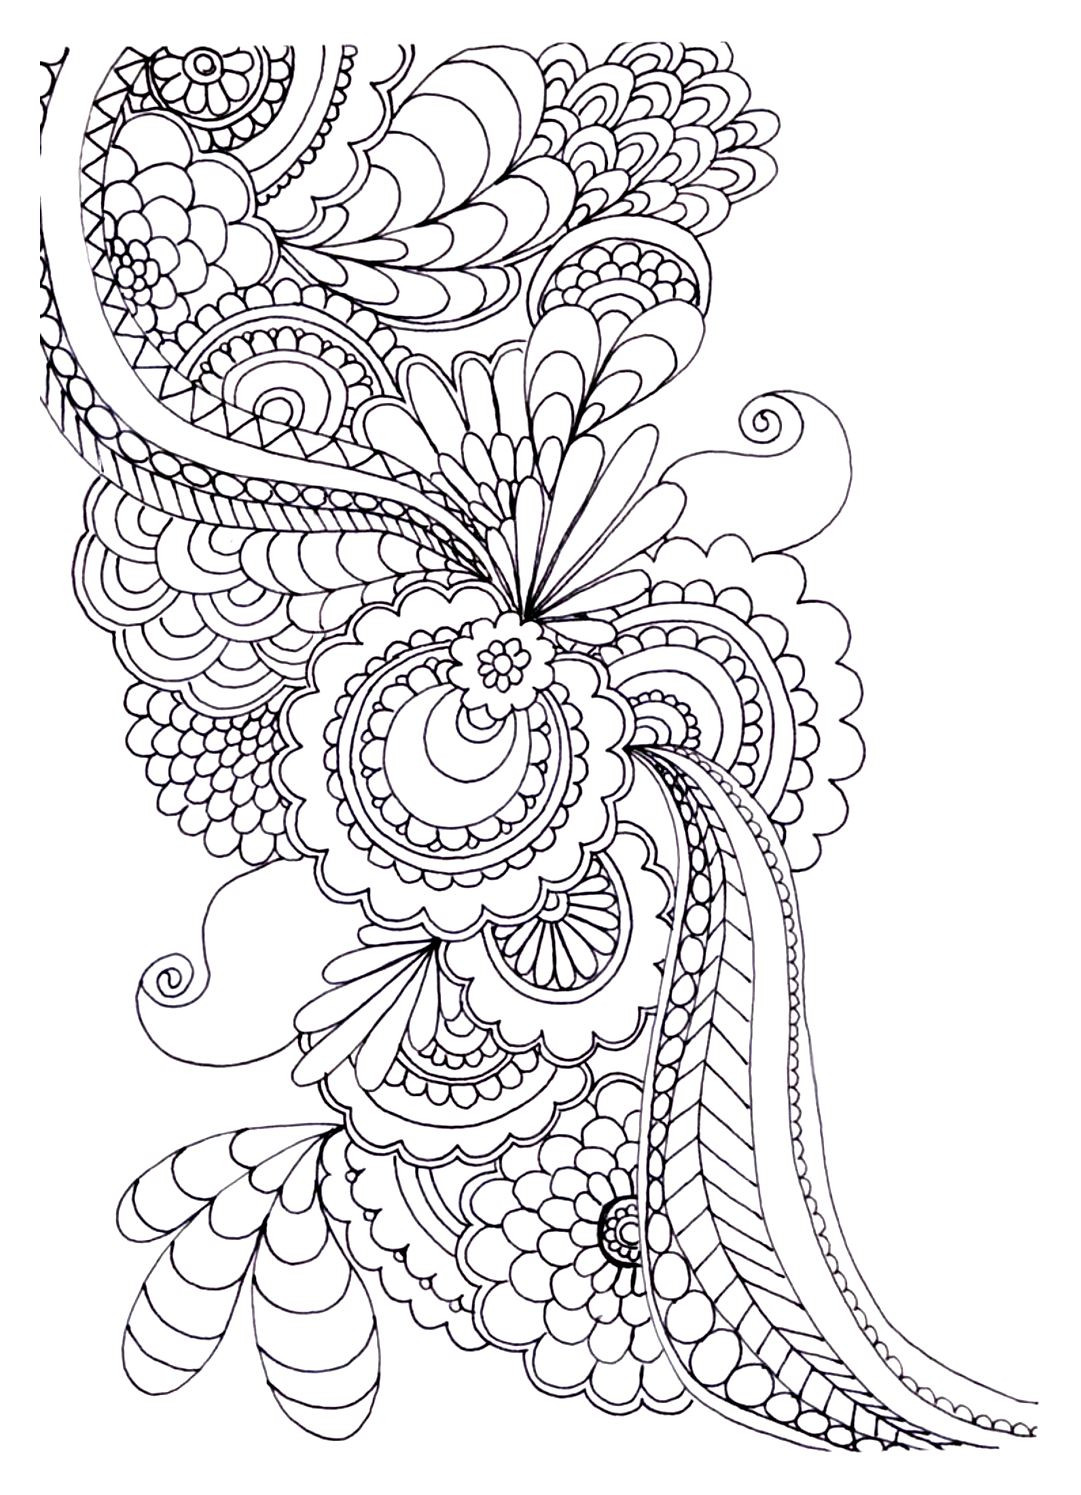 Watercolor Coloring Books For Adults
 20 Free Adult Colouring Pages The Organised Housewife